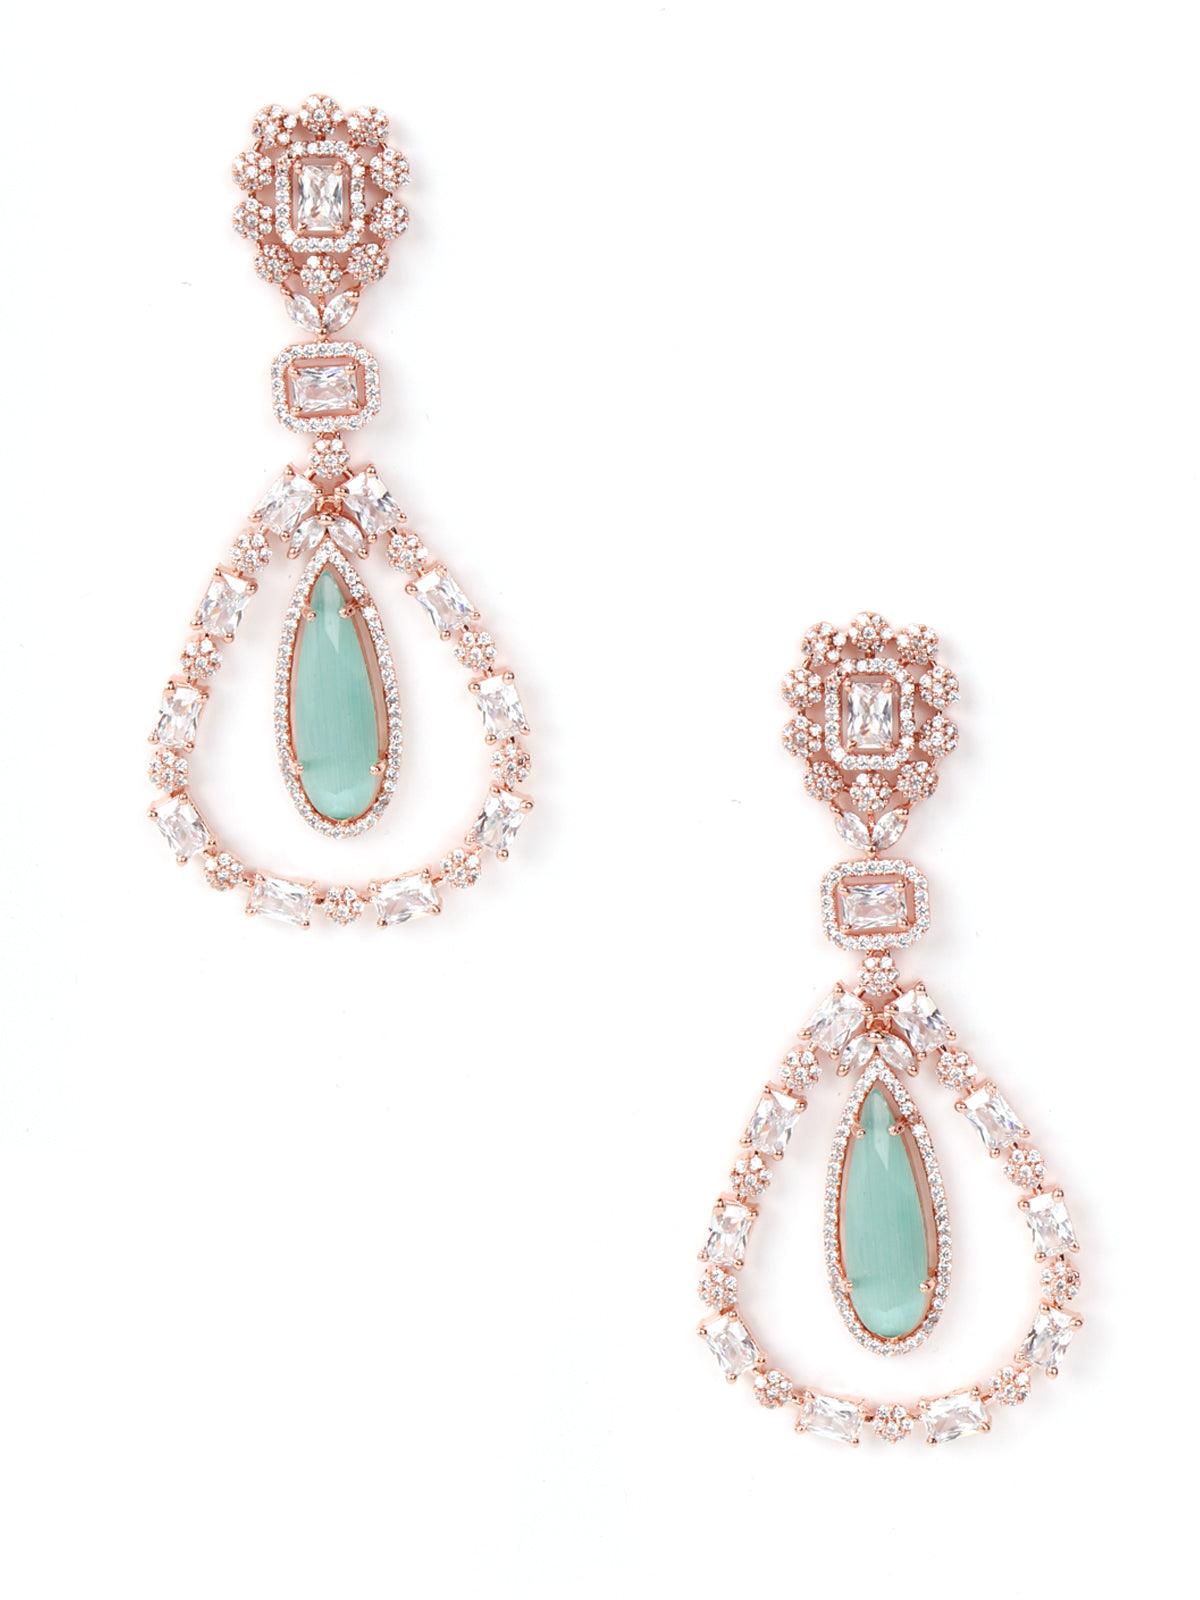 Authentic danglers with emerald stone Earring - Odette